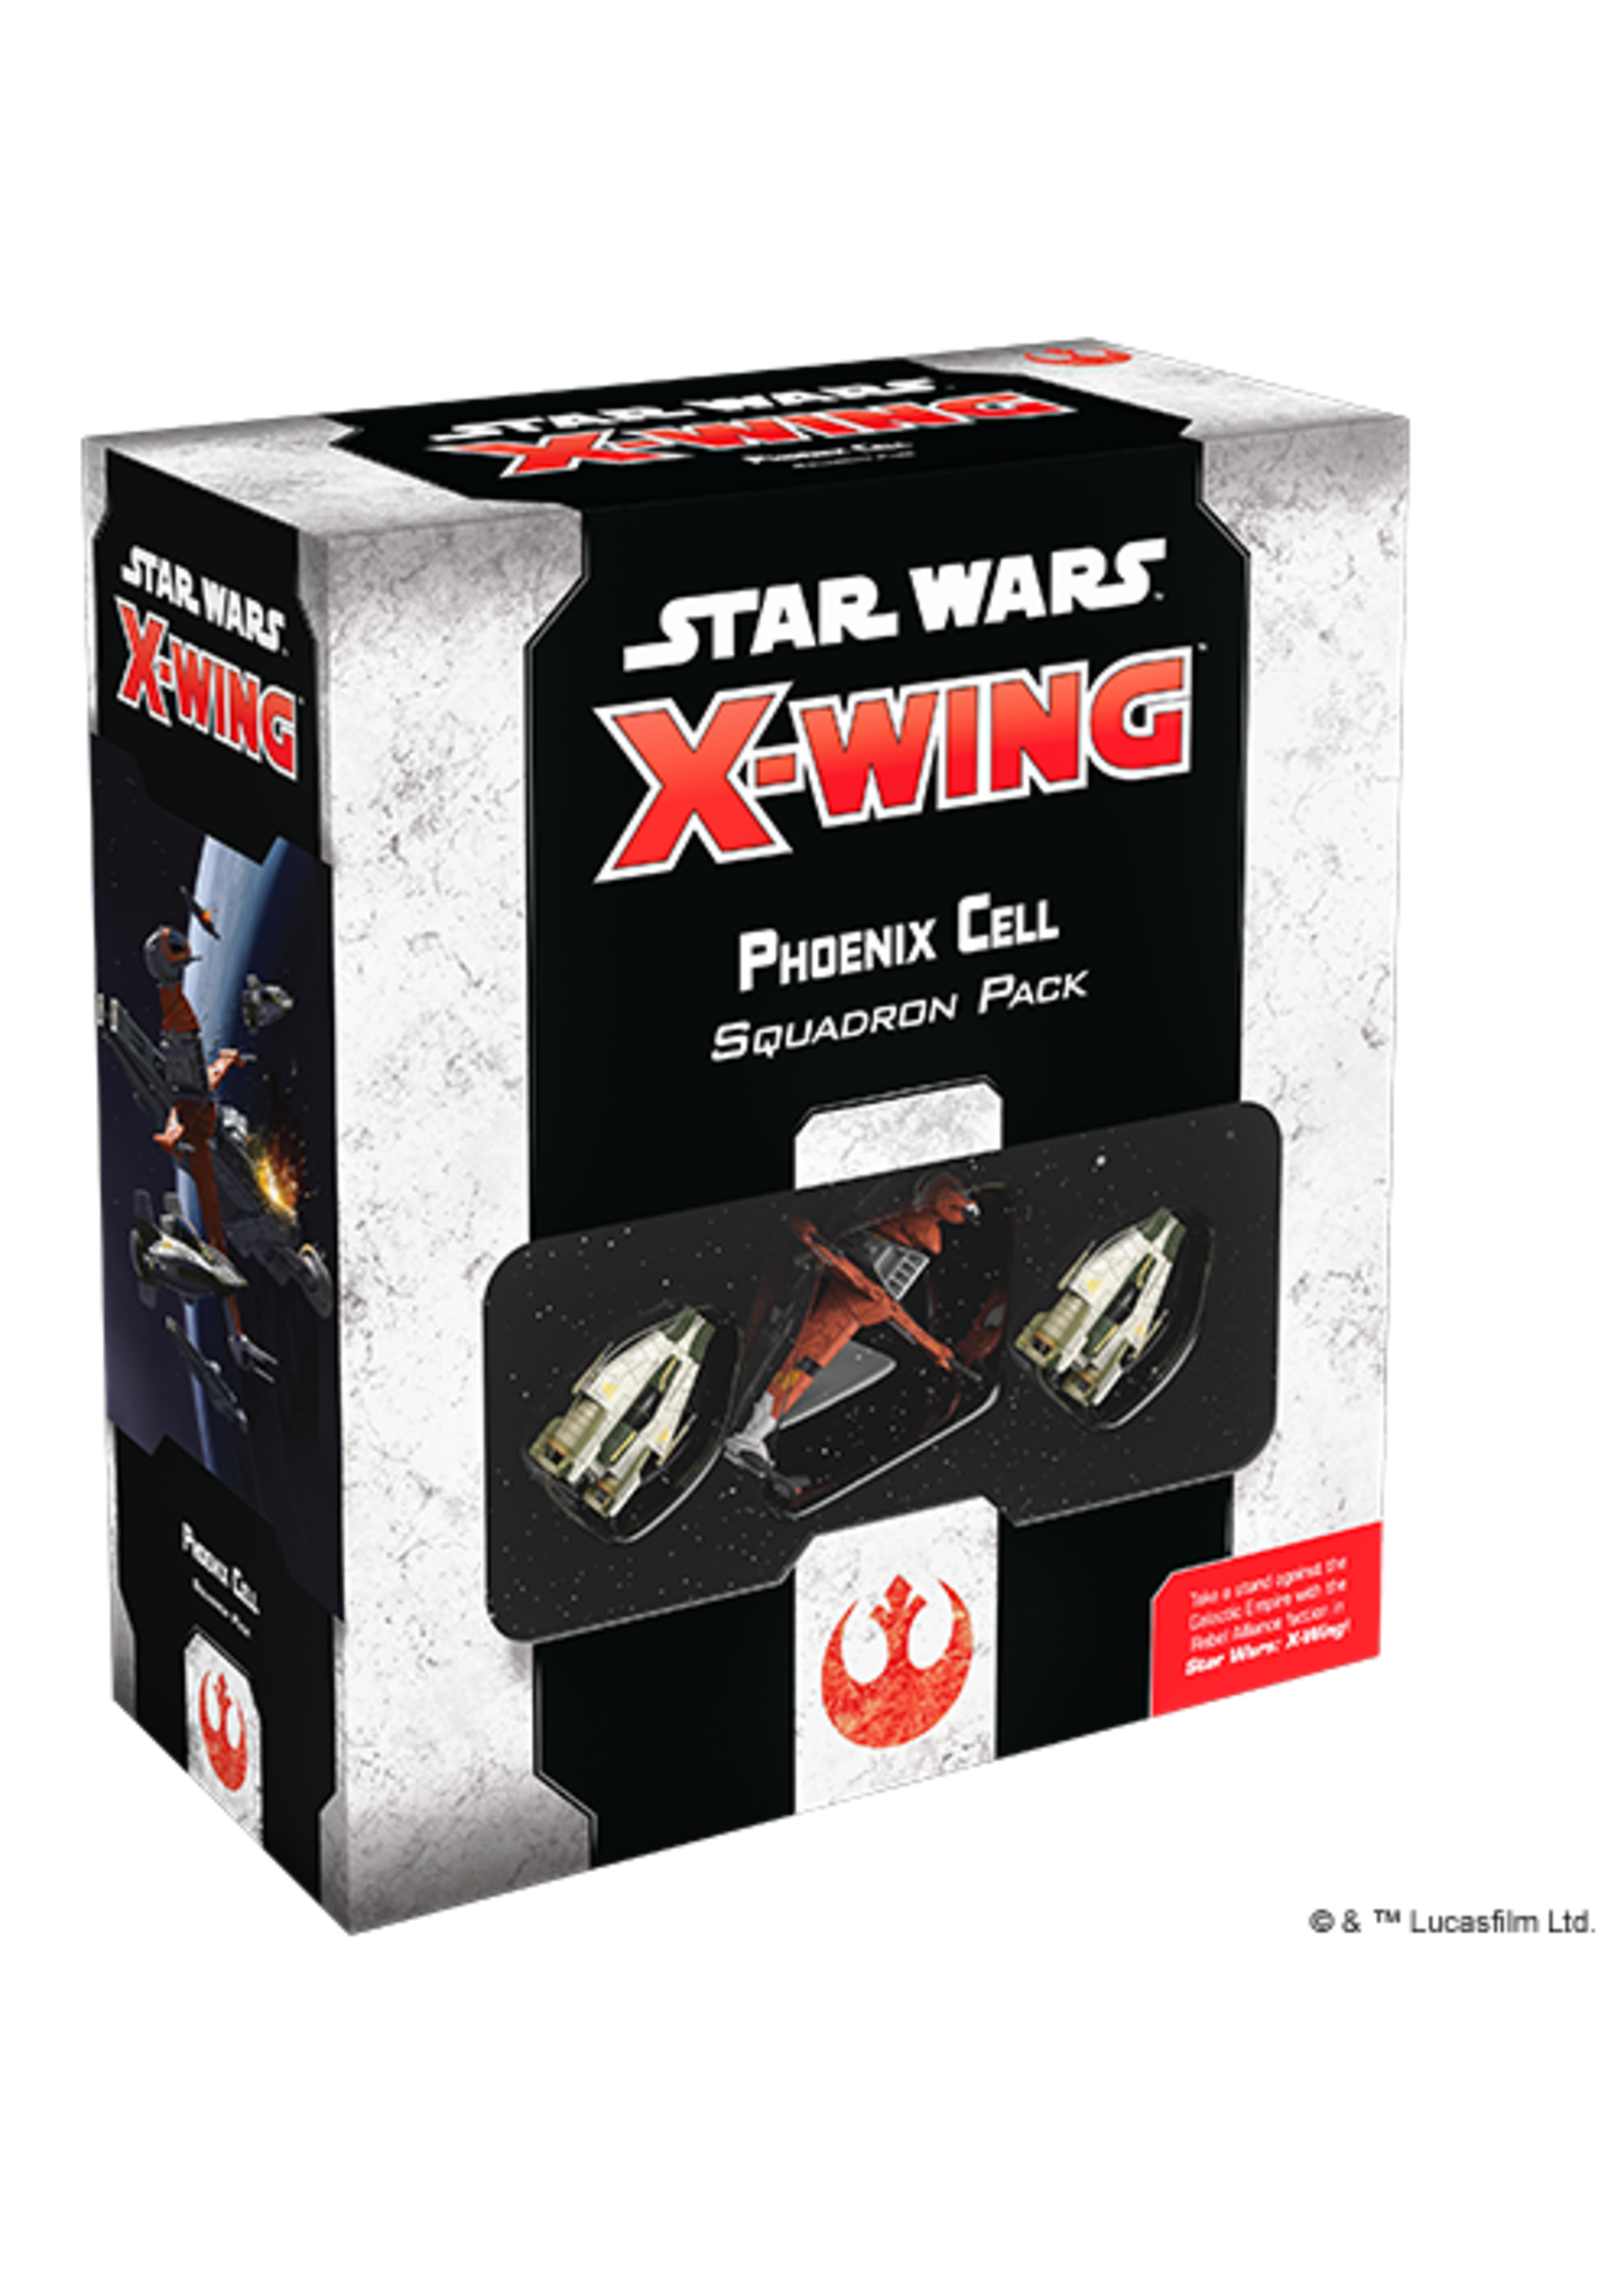 Star Wars X wing Phoenix Cell Squadron Pack